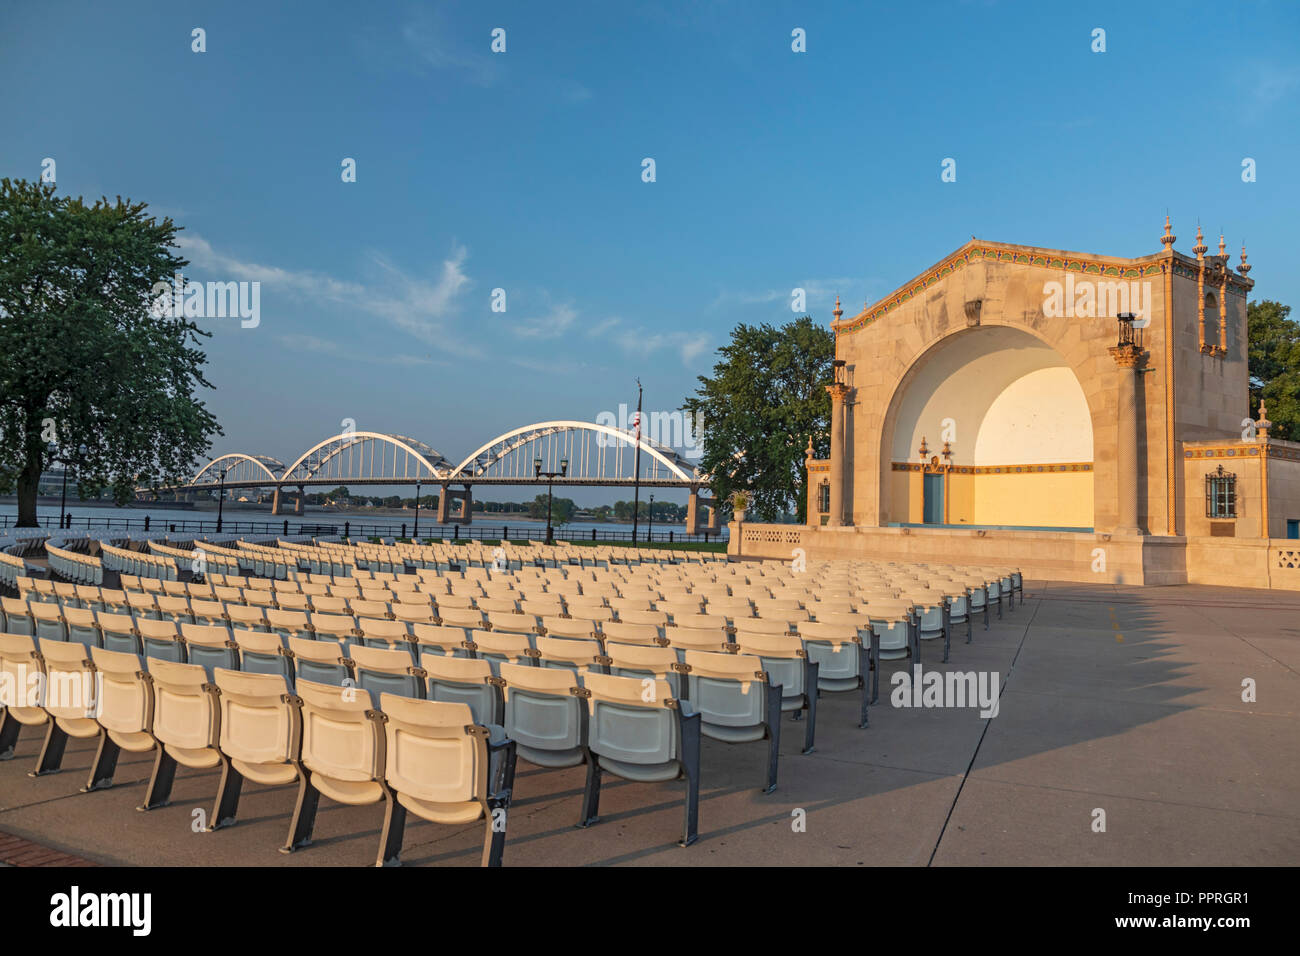 Davenport, Iowa - The LeClaire Park bandshell, next to the Mississippi River. The Rock Island Centennial Bridge connects Davenport with Rock Island, I Stock Photo